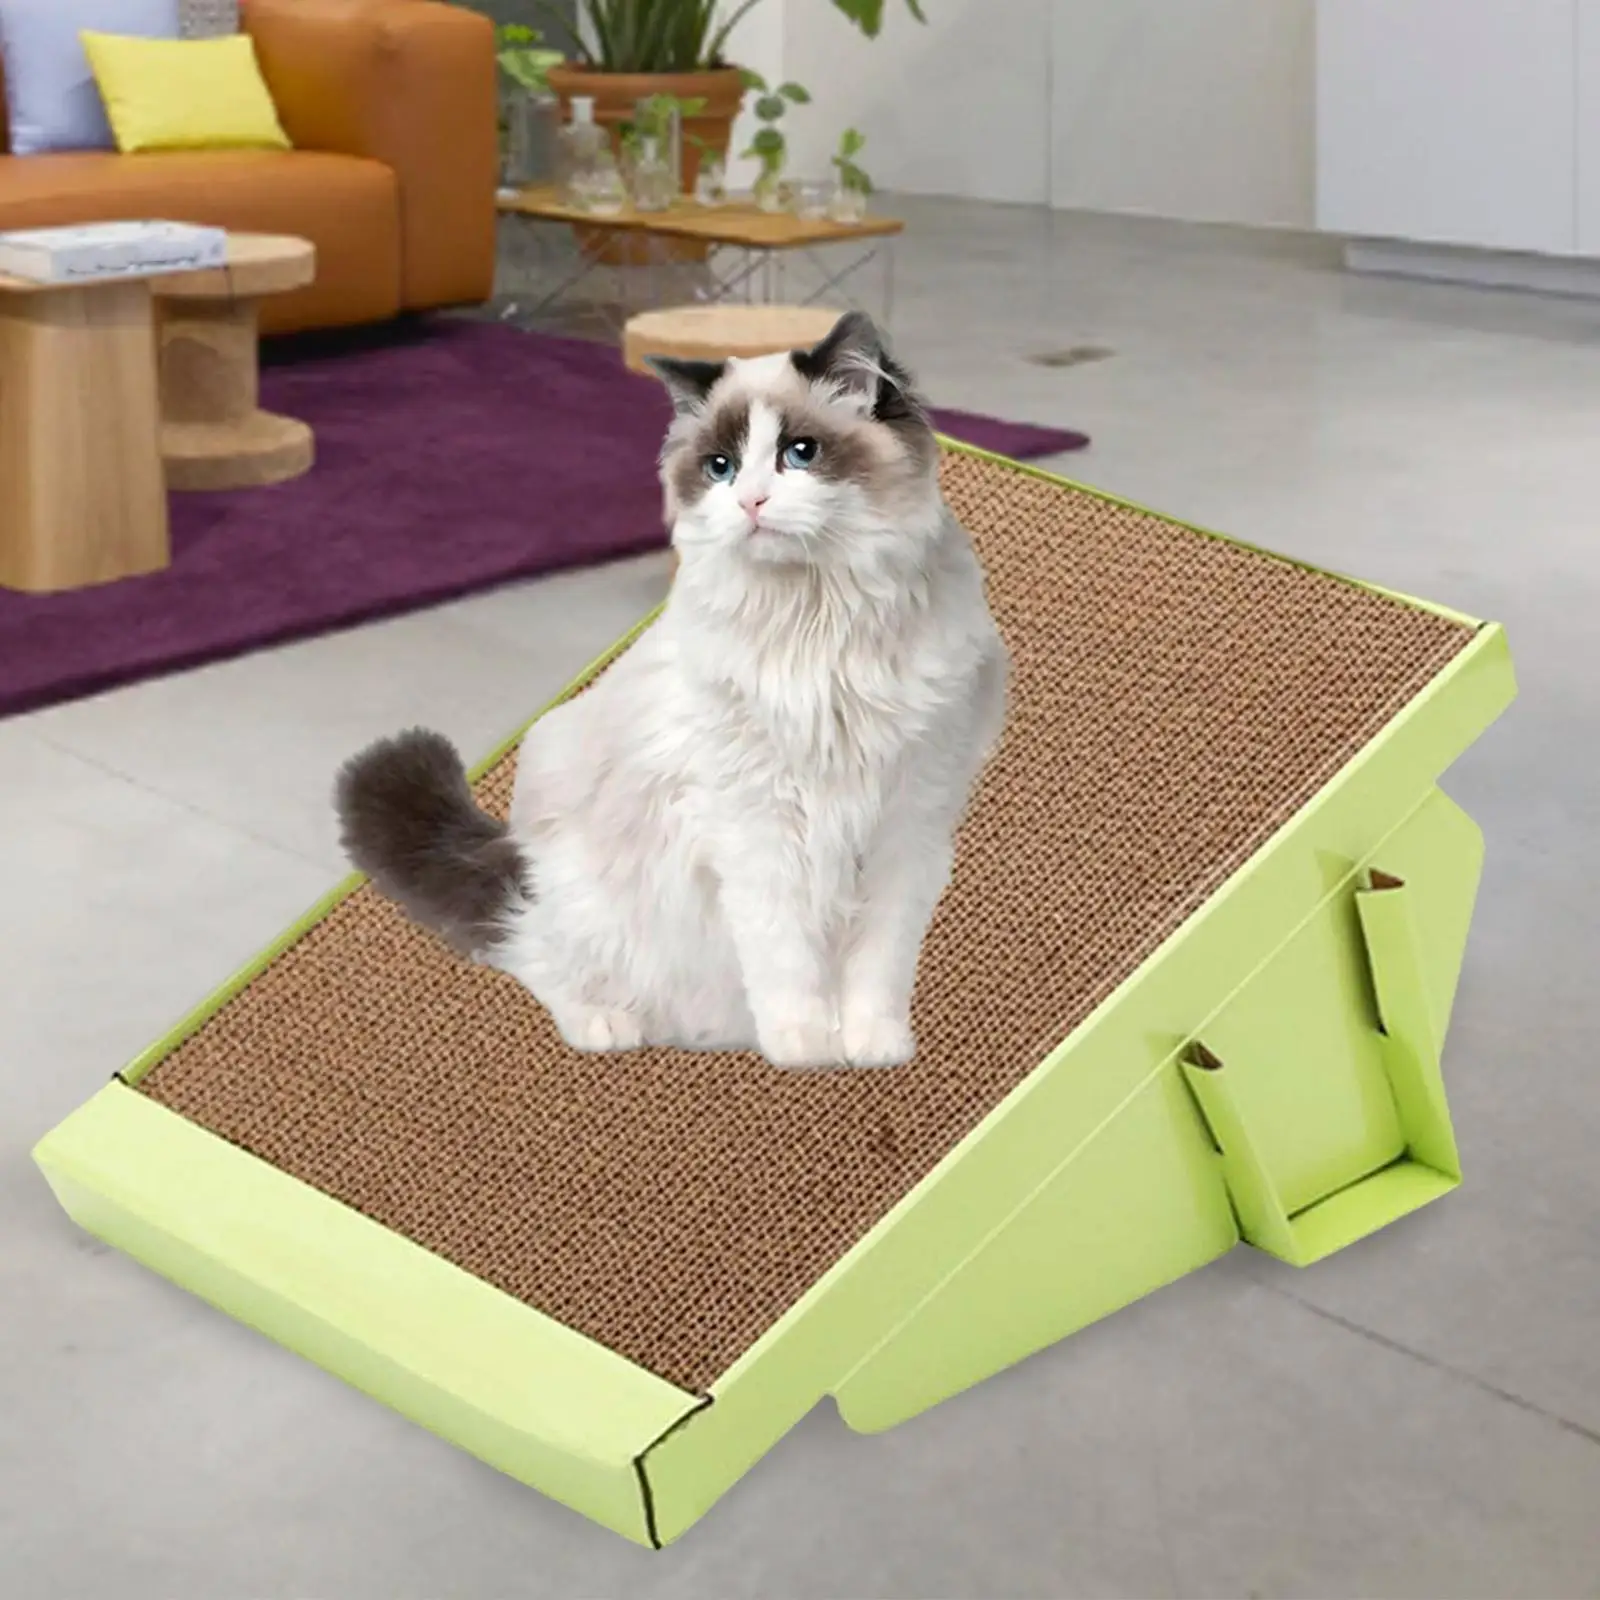 Pet Cat Scratcher Pad Slide Bed Scratching Board Grinding Claw Interactive Play Toy for Kitten Furniture Protector Pet Supplies